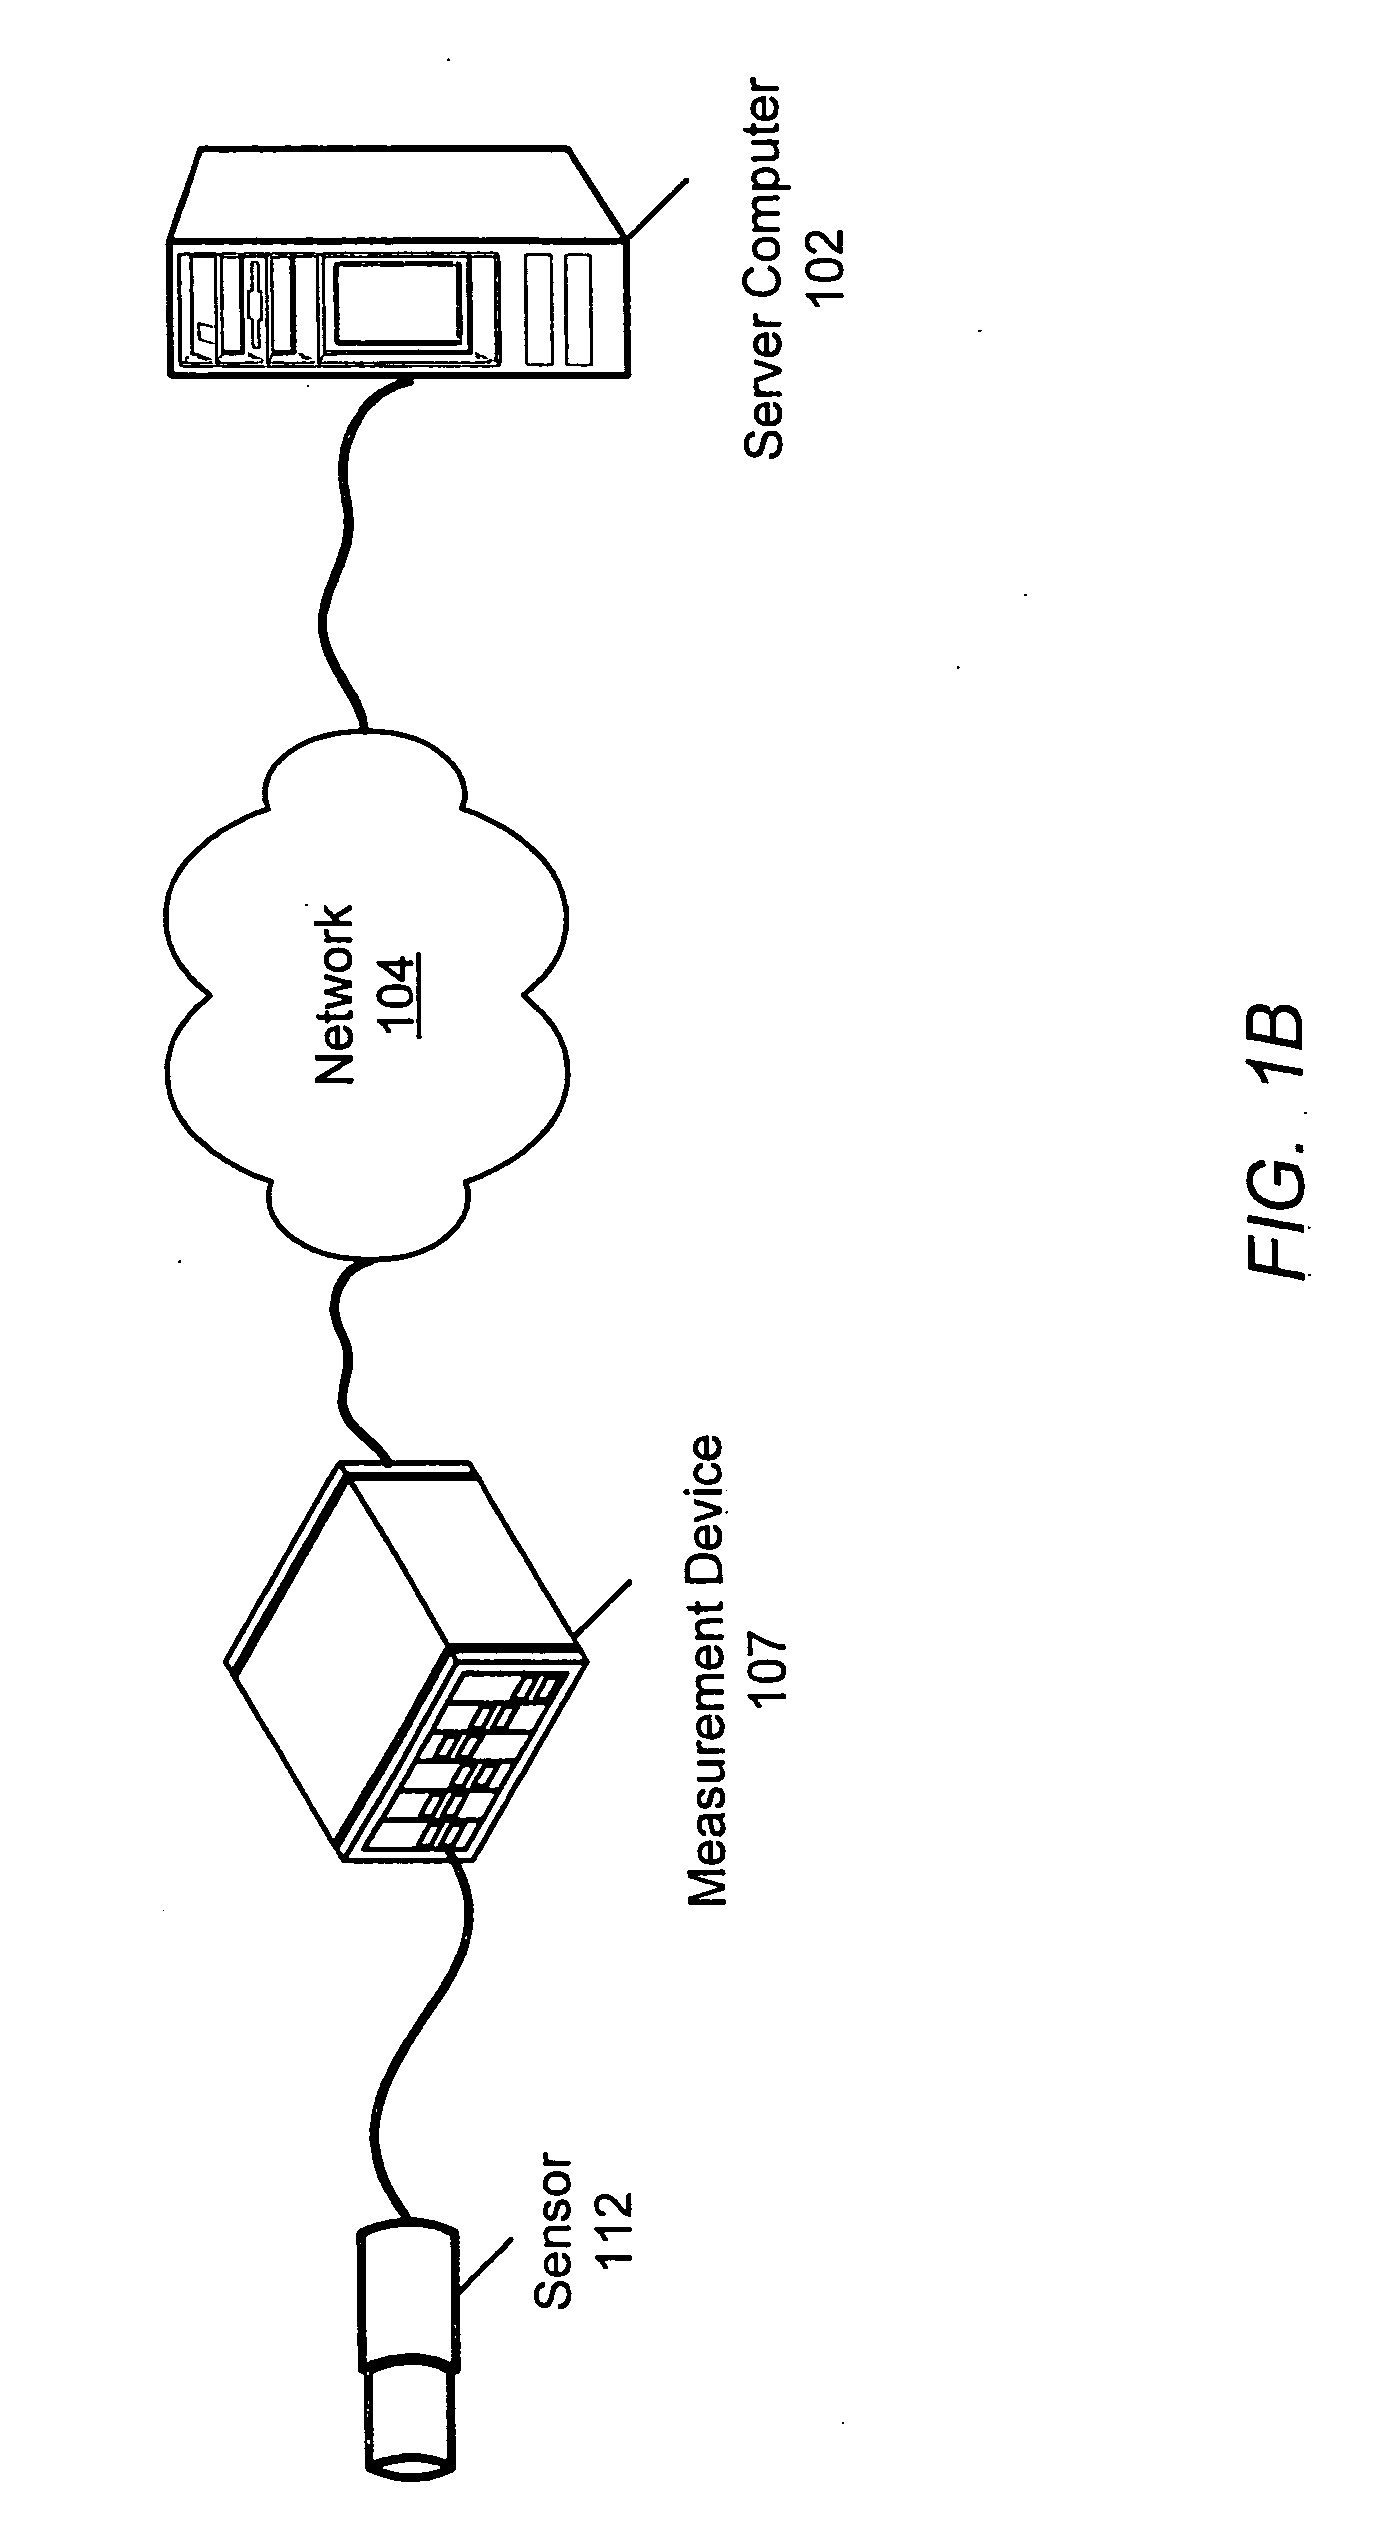 Programmable hardware element with cartridge controllers for controlling modular measurement cartridges that convey interface information